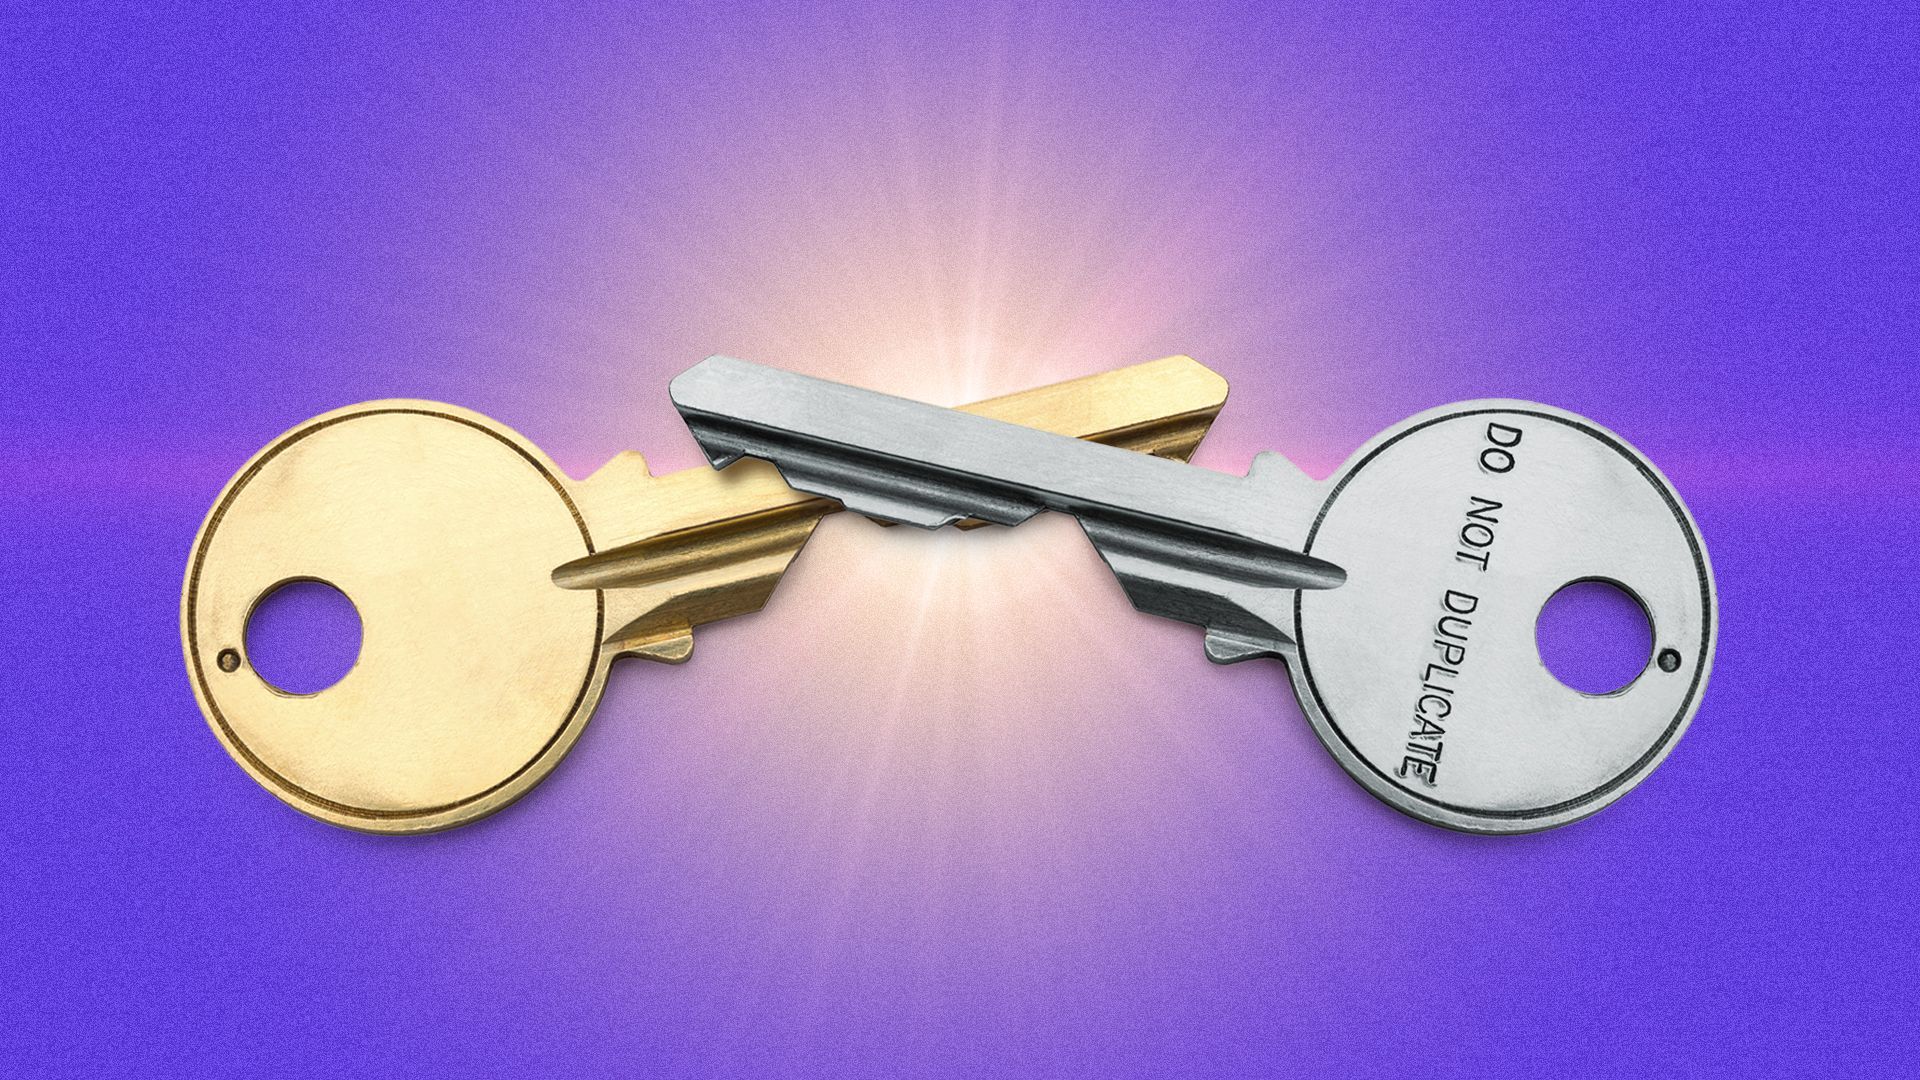 Illustration of two keys crossed over one another with a beam of light behind them